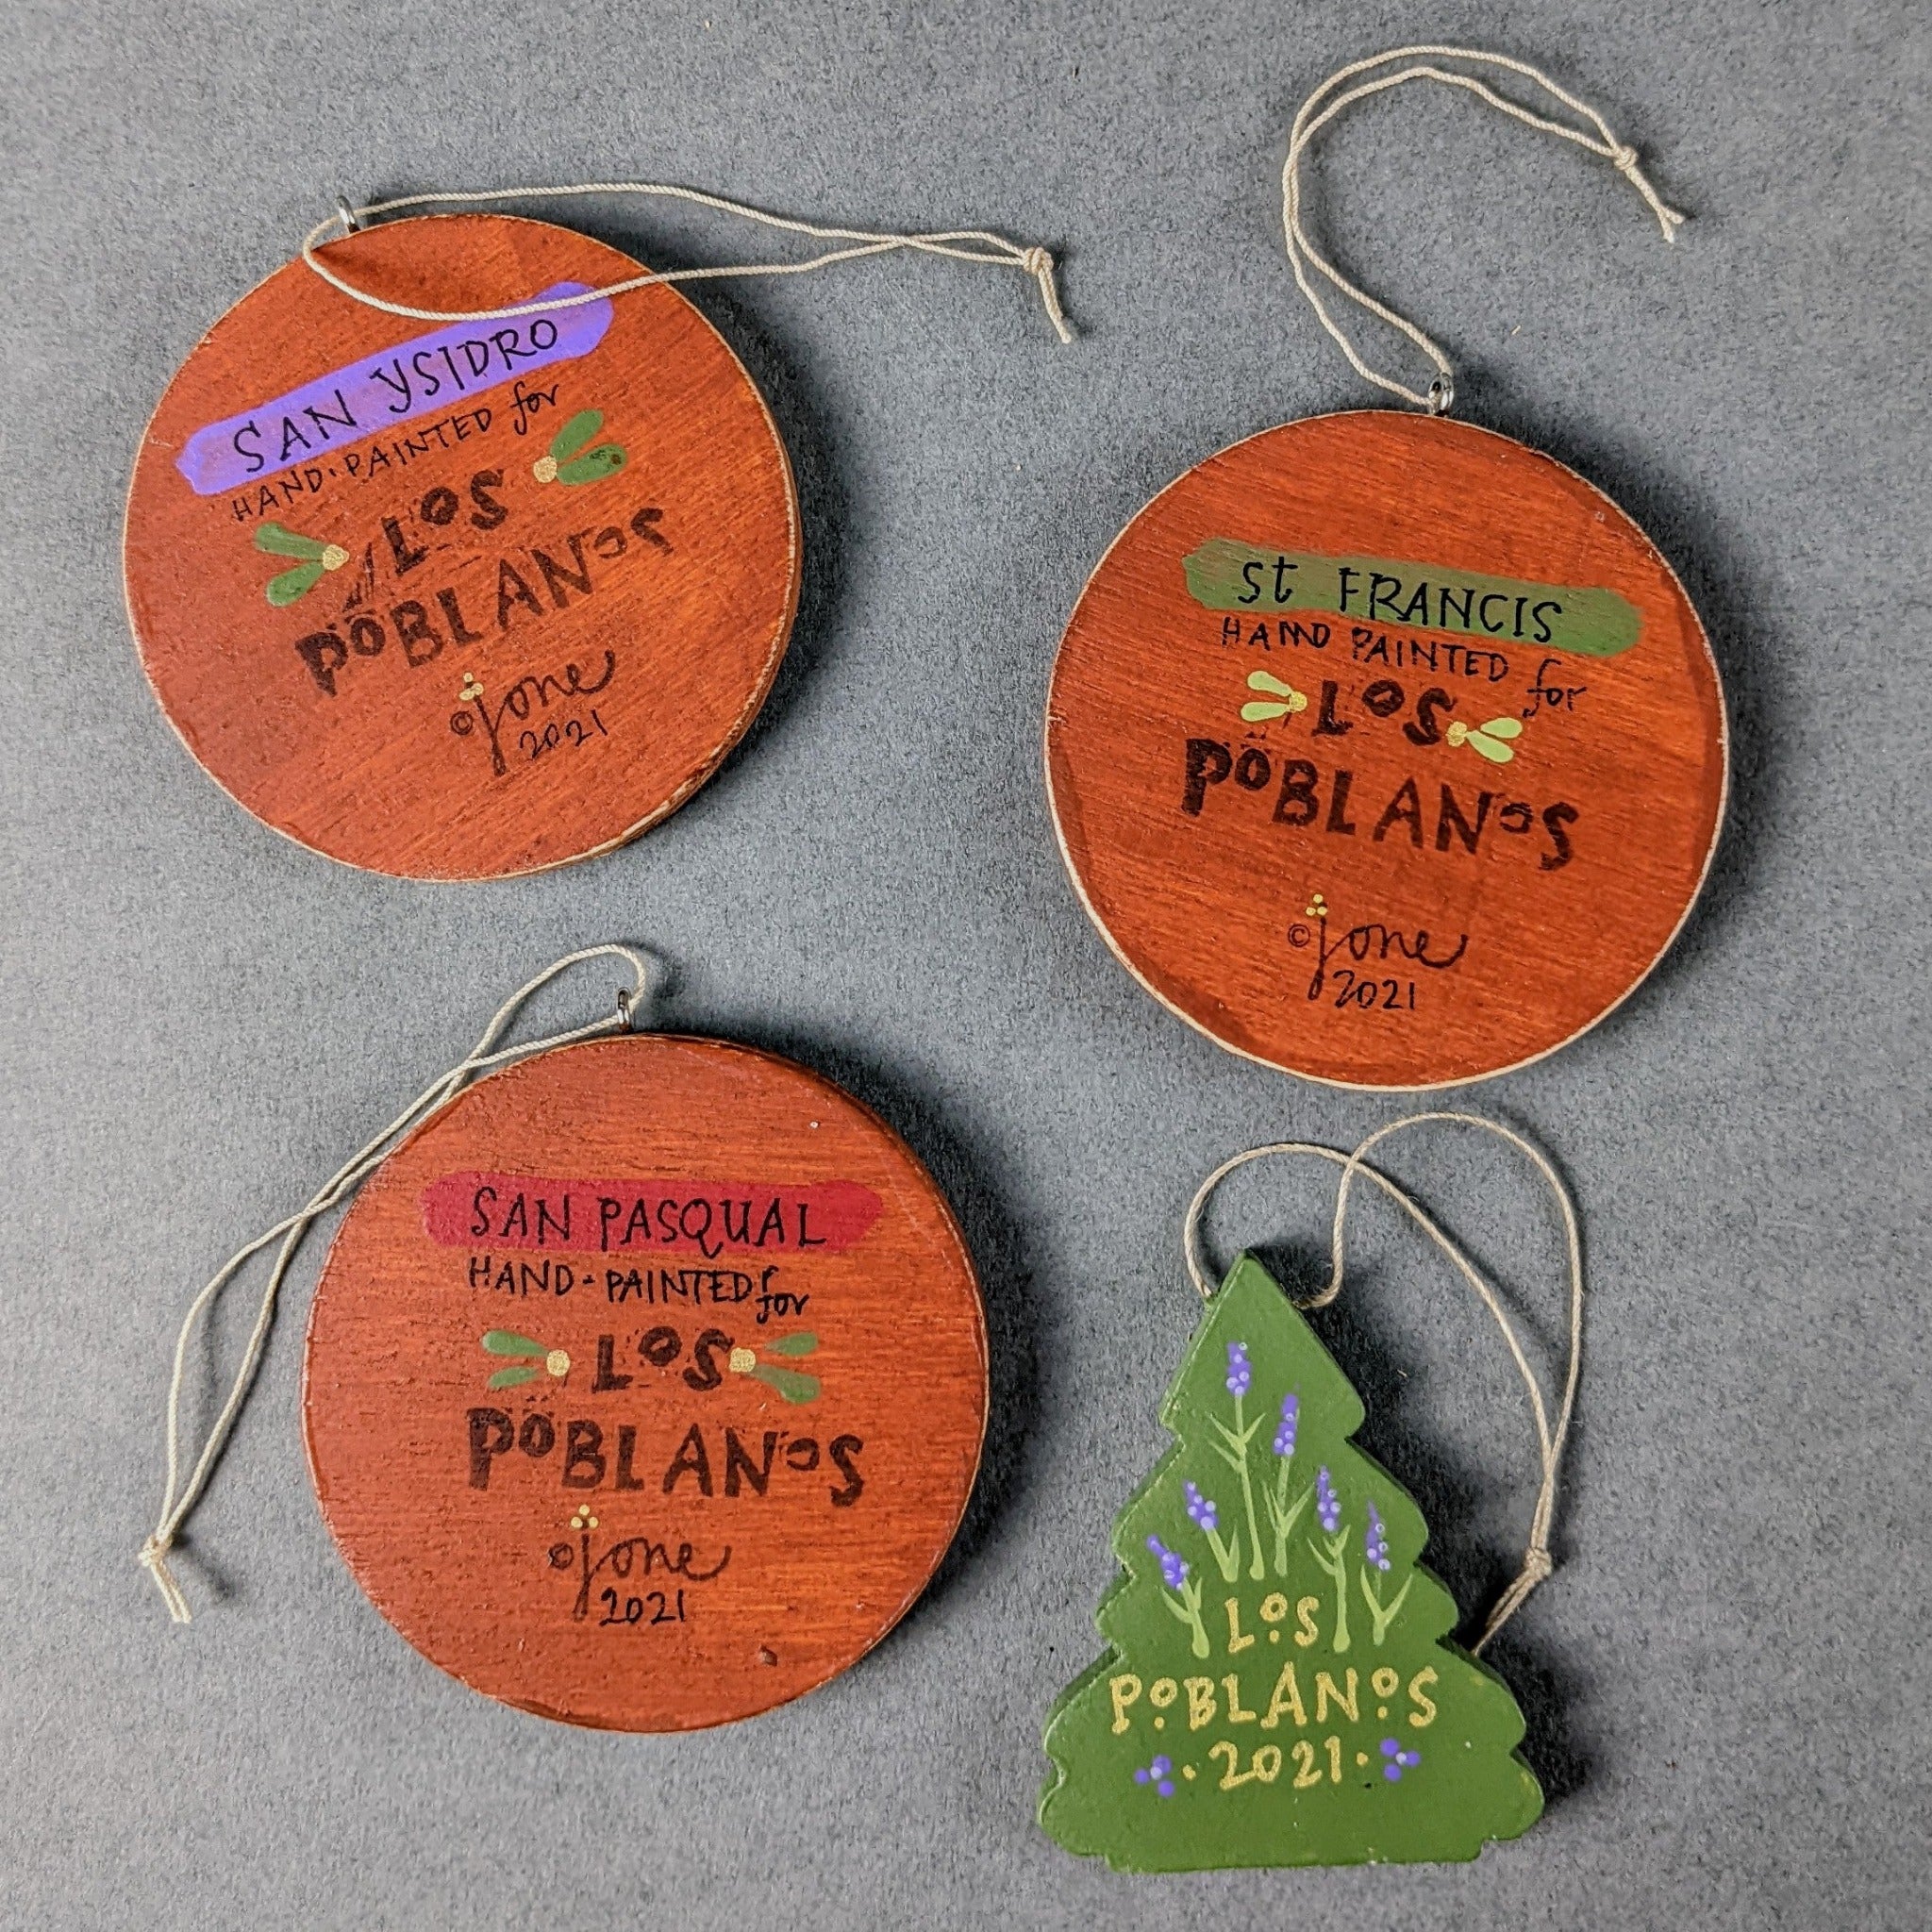 Hand-painted Wooden Ornaments by Jone Hallmark